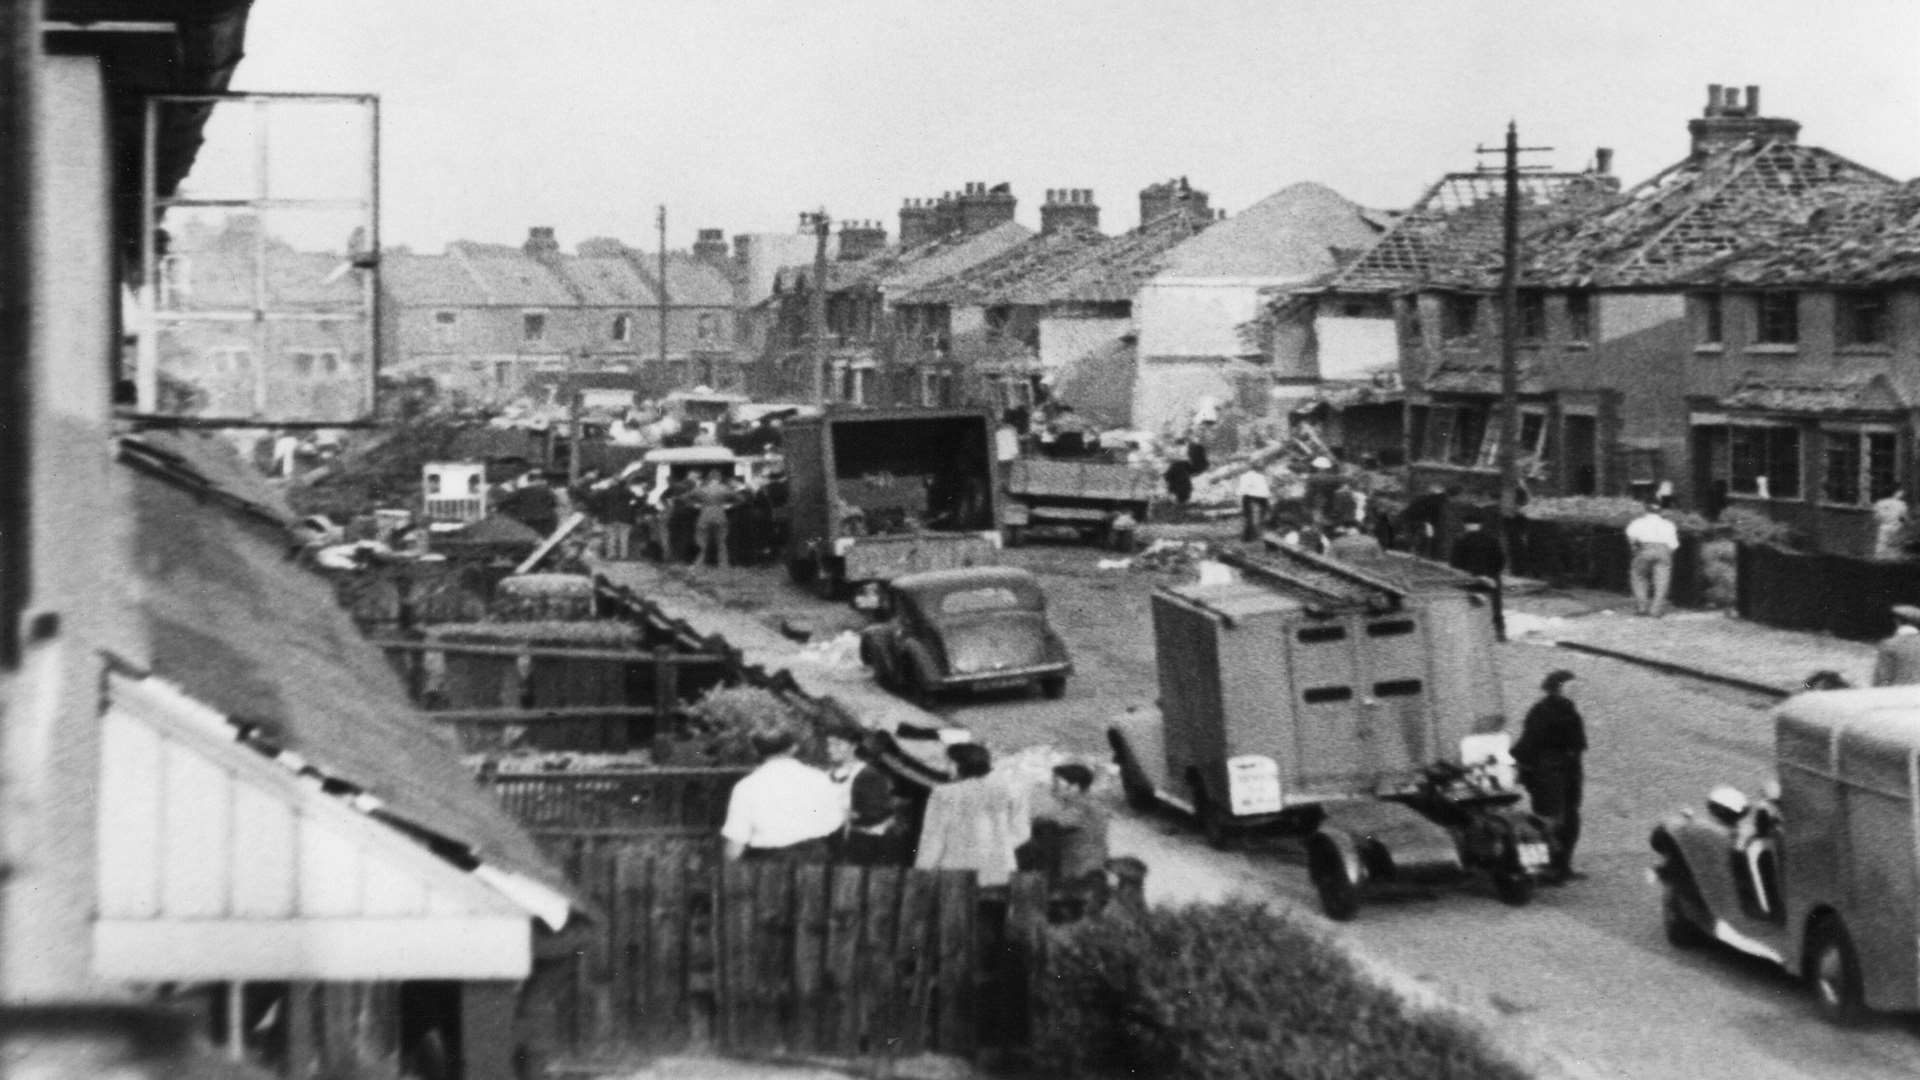 Carrington Road in the aftermath of the Doodlebug bombings